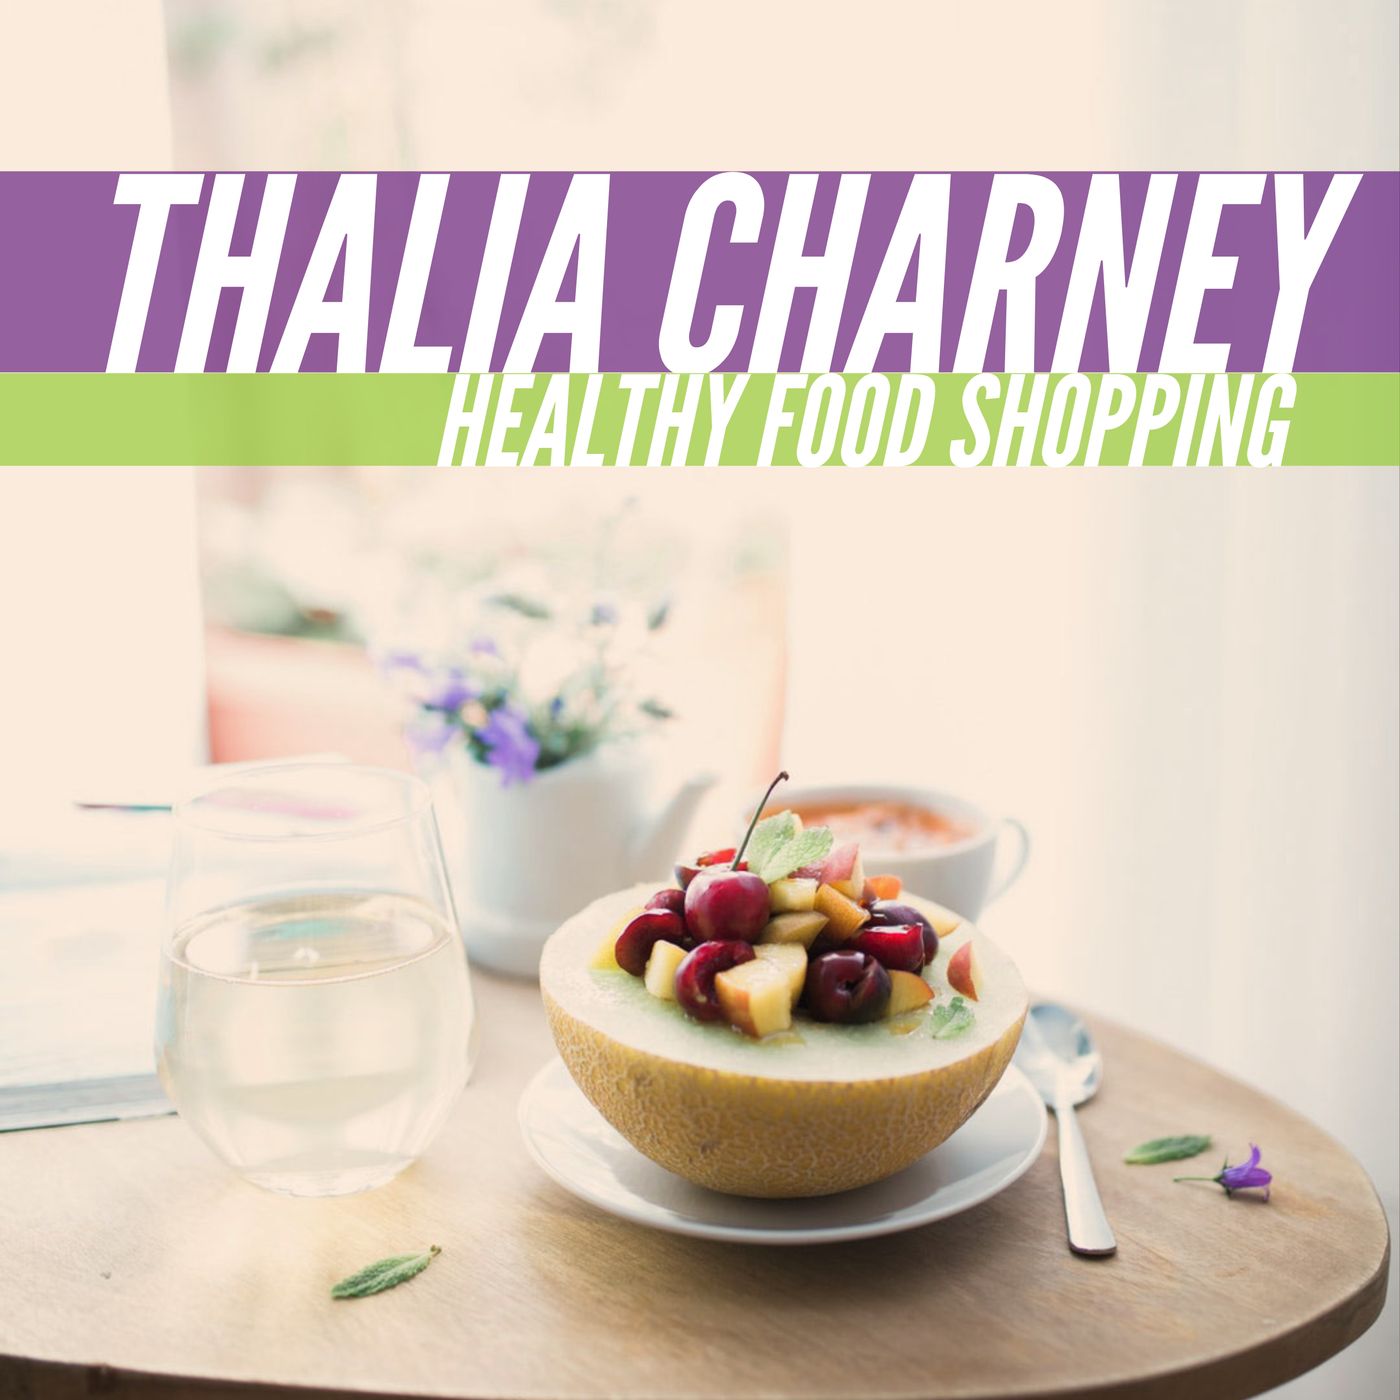 Confident, Healthy Food Shopping with Thalia Charney, The Classroom Doc